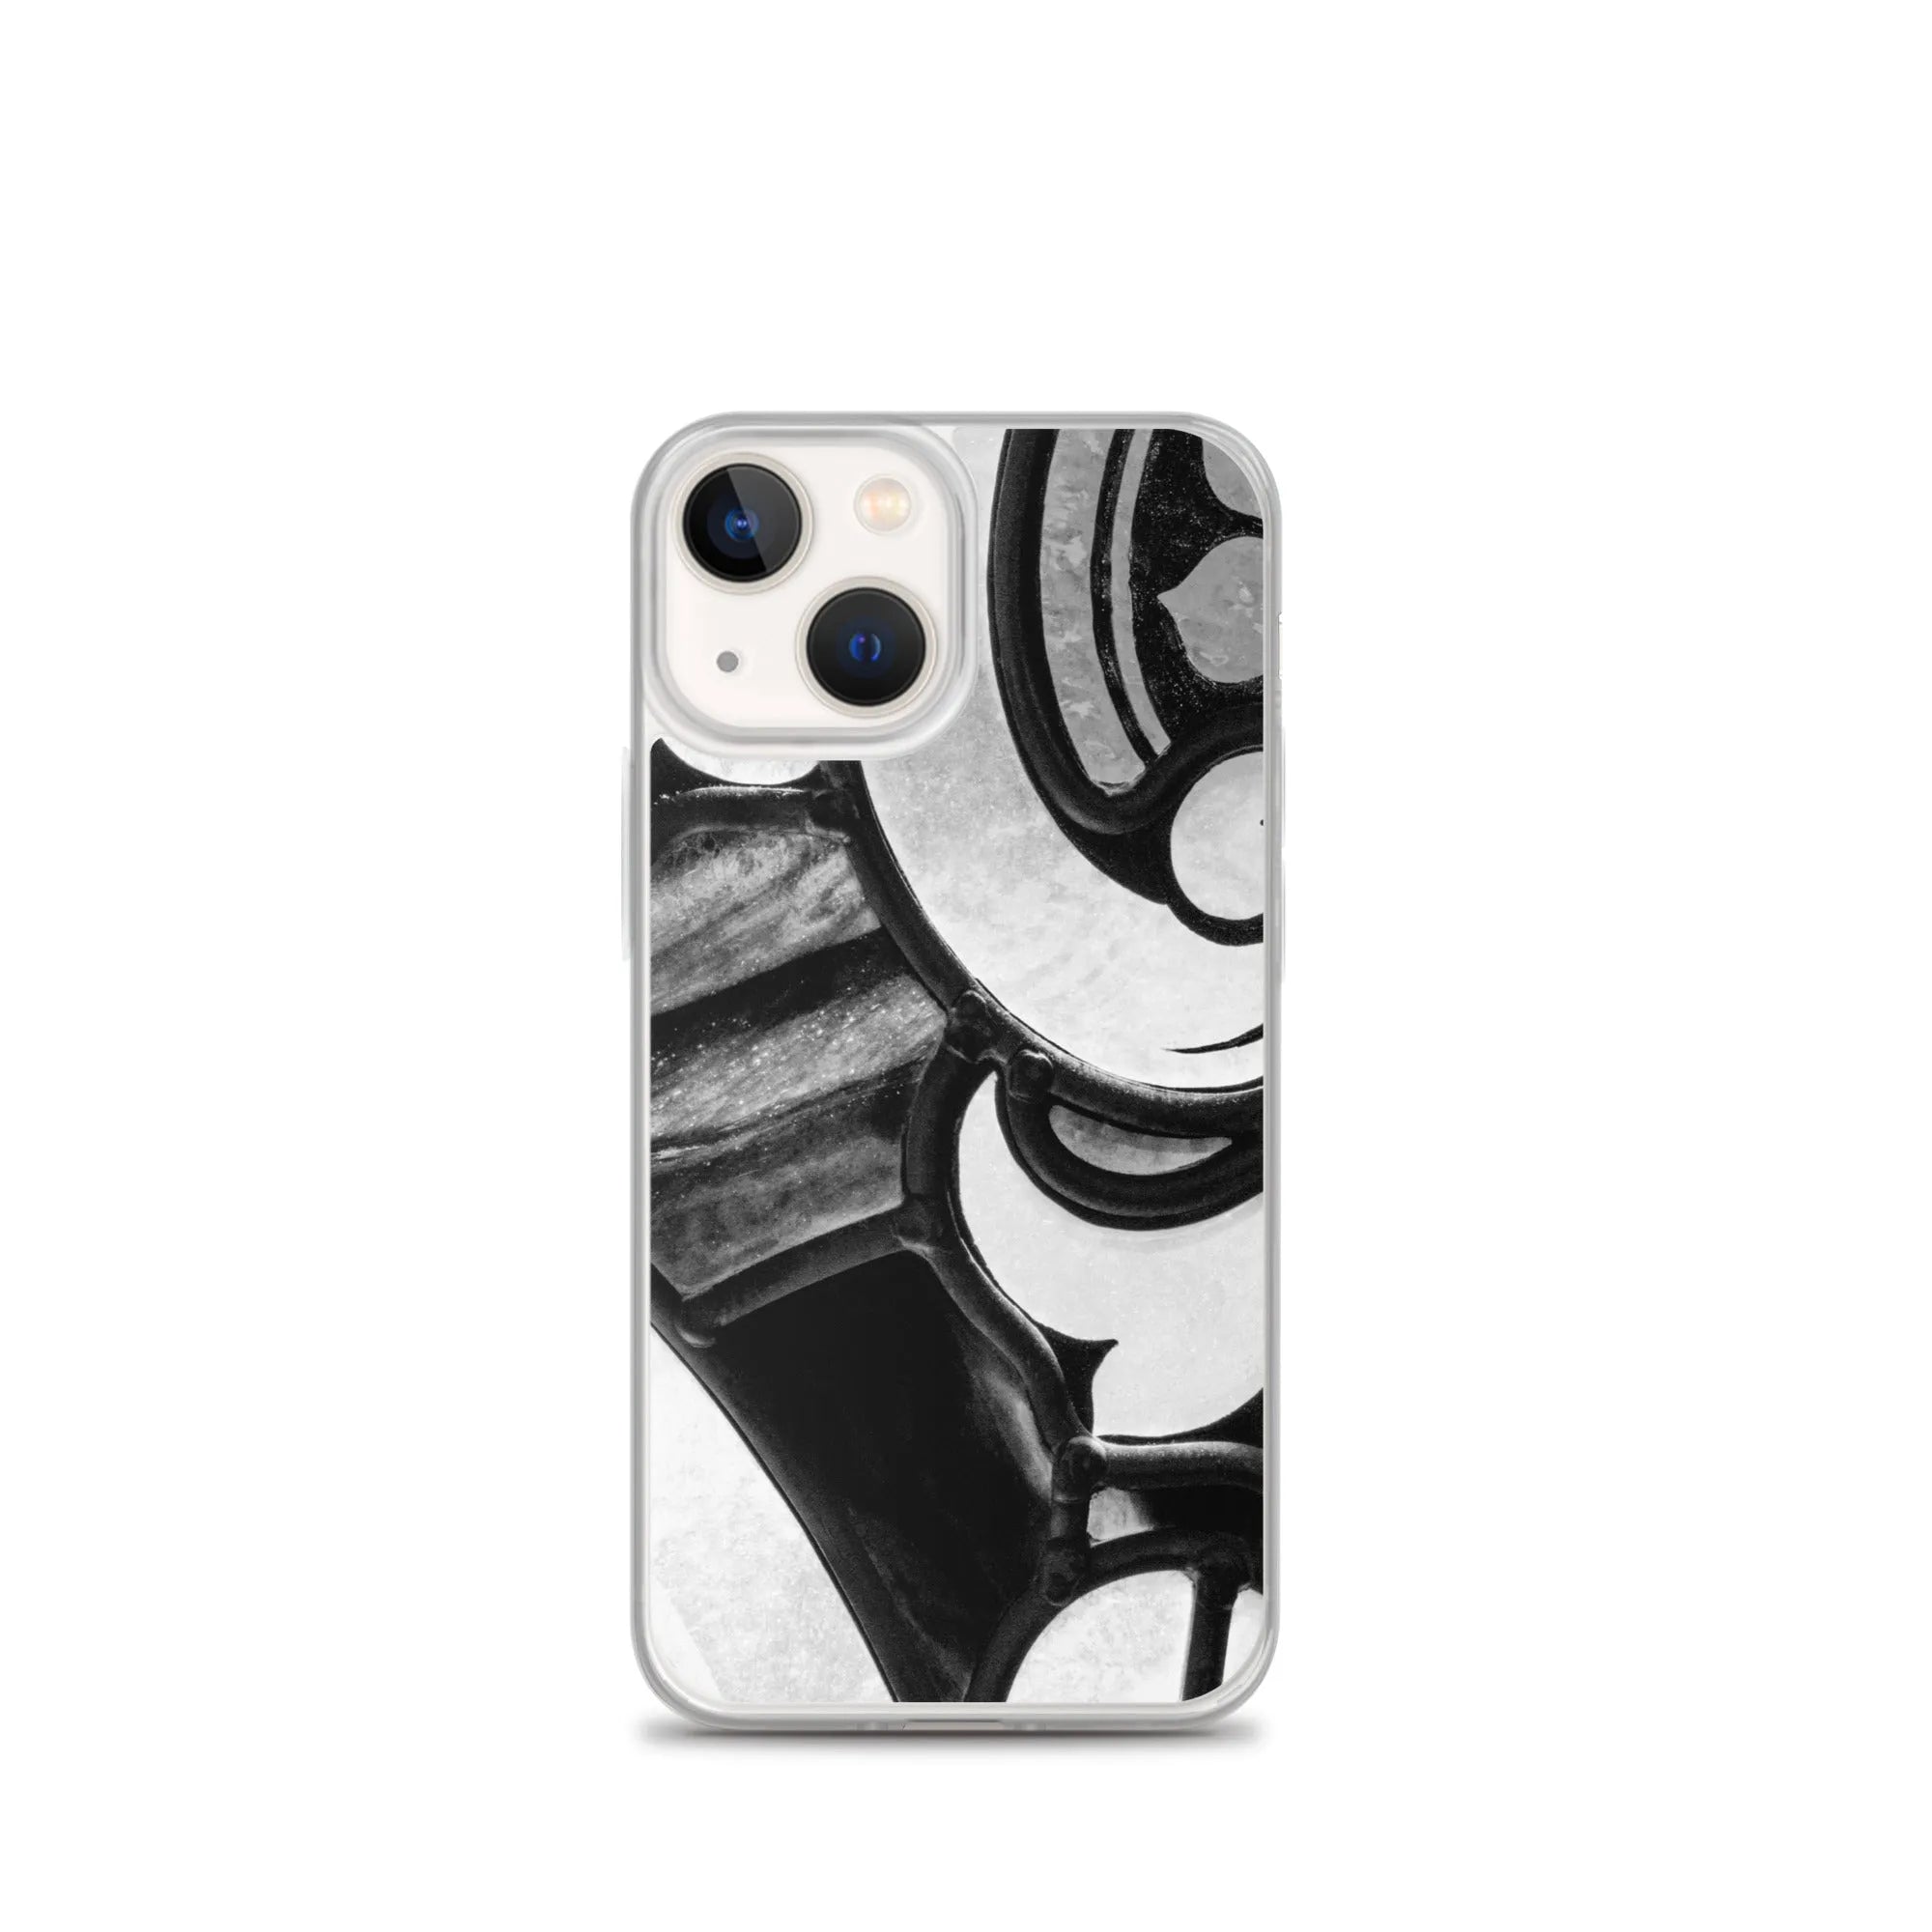 Stay Glassy - Designer Travels Art Iphone Case - Black And White - Iphone 13 Mini - Mobile Phone Cases - Aesthetic Art